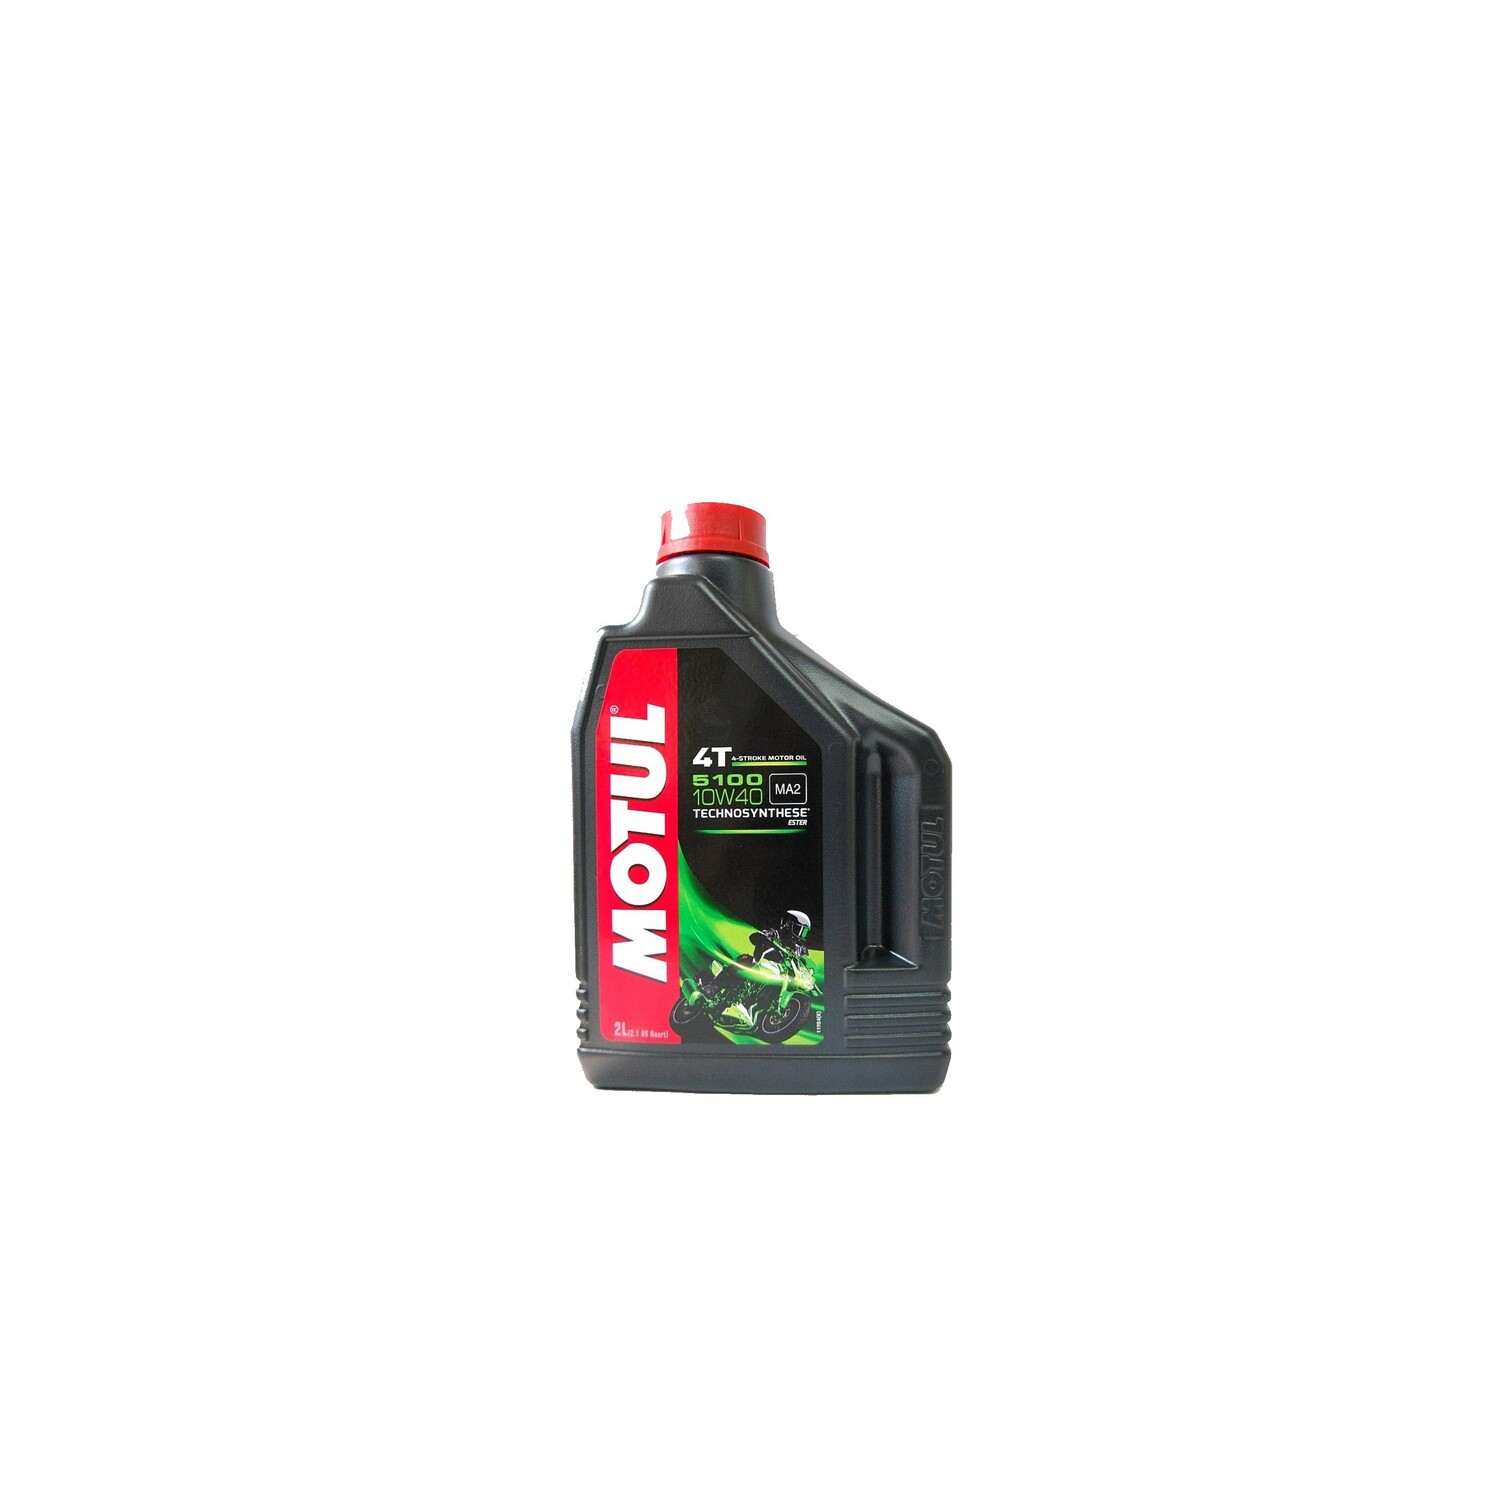 <span style="font-weight: bold;">Масло моторное MOTUL 5100 10W-40 4Т, 2 л.</span>&nbsp;